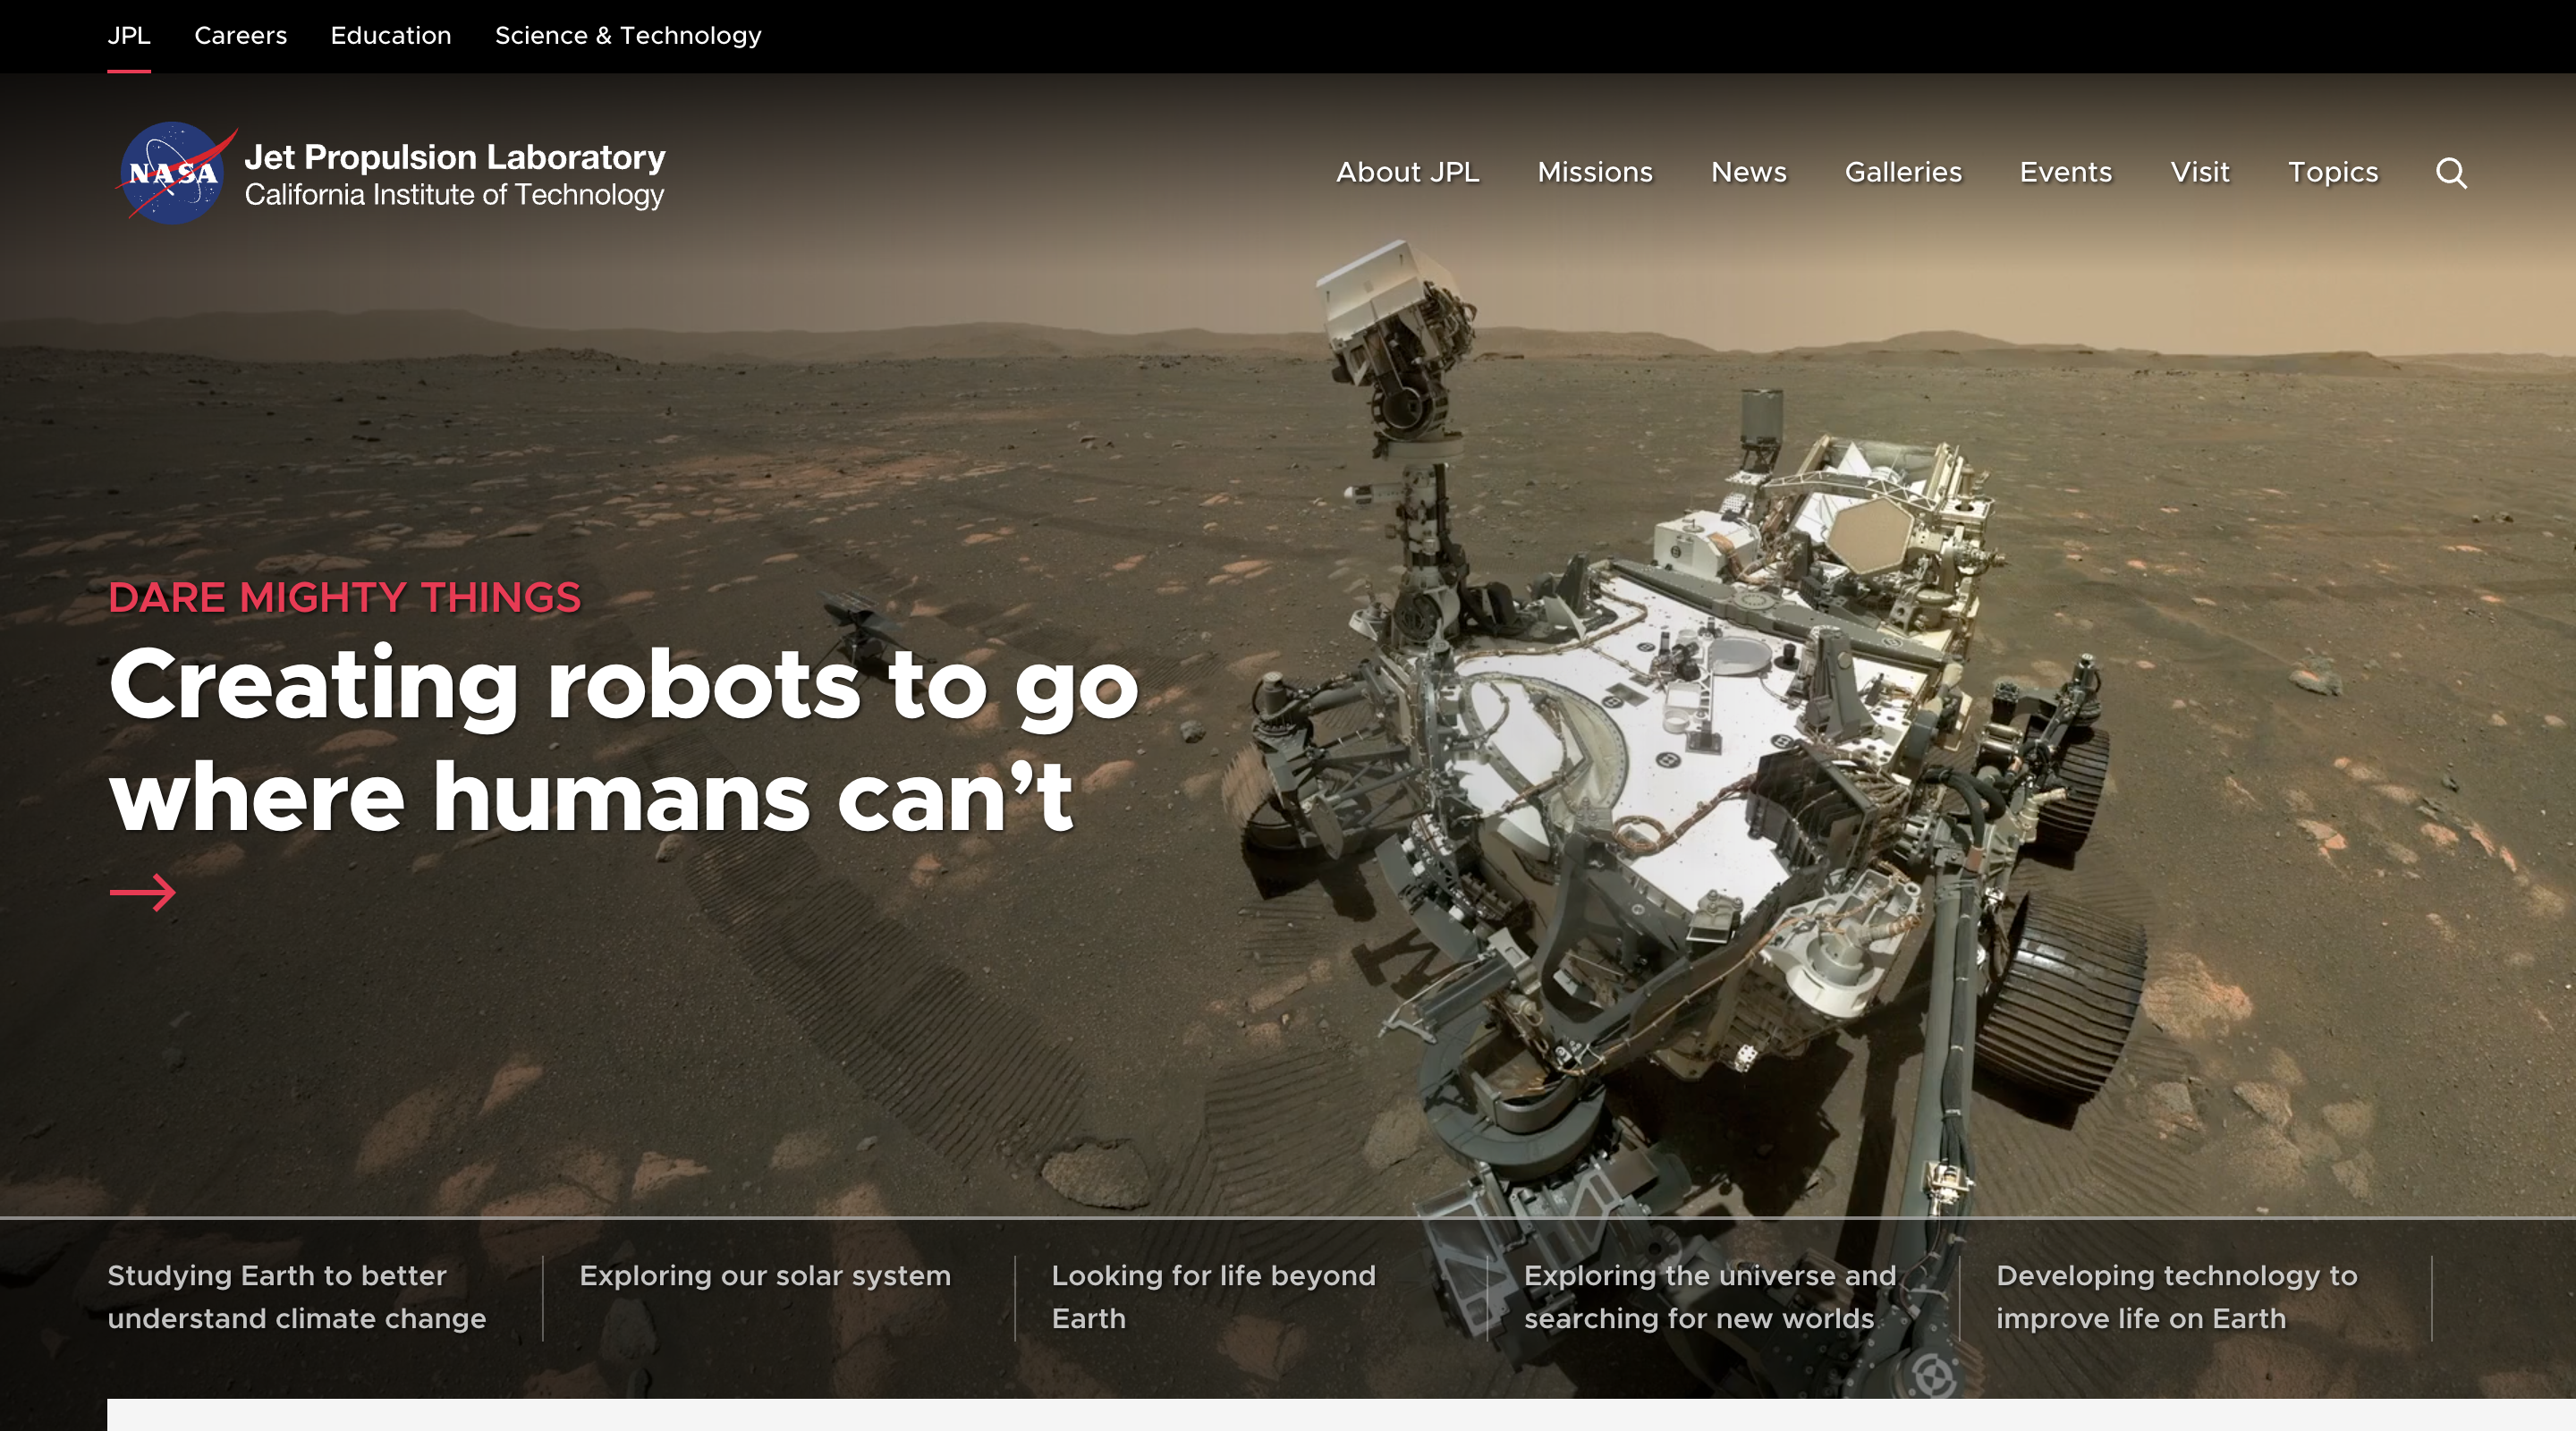 Screenshot of the NASA Jet Propulsion Laboratory home page. The header contains the NASA logo and main site navigation. The hero has a background image which is a selfie taken by NASA's Perseverance Mars Rover.